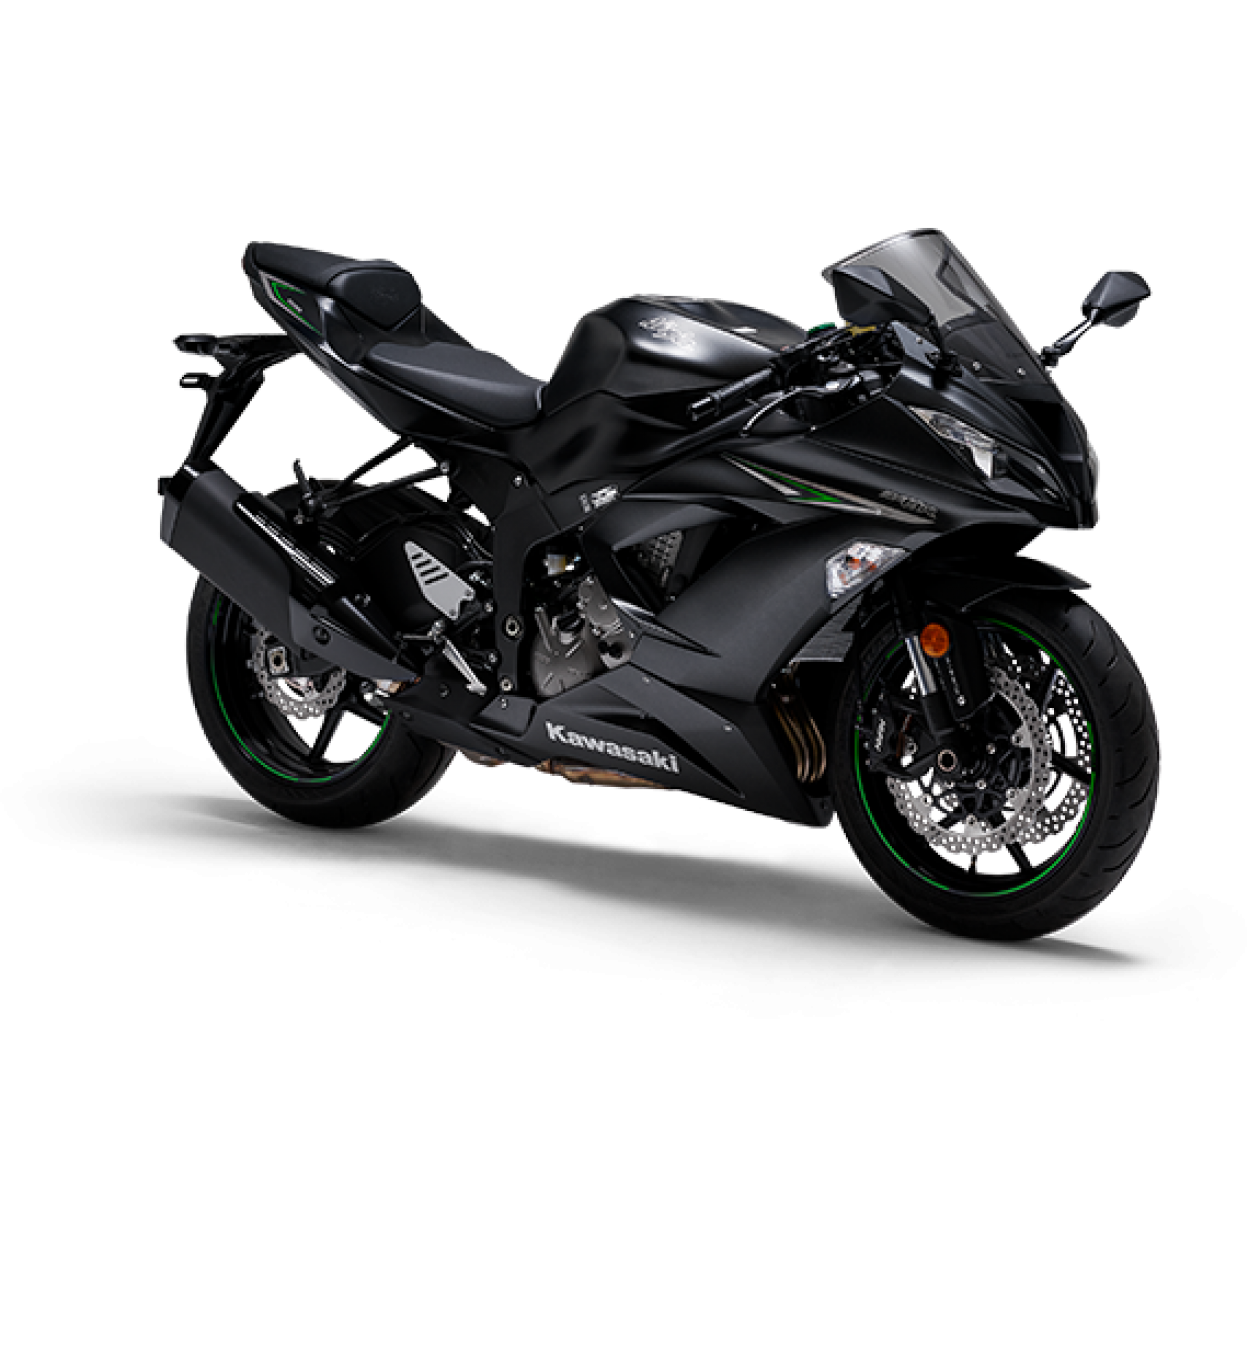 Best motorcycle and motorbike safety information for riders from TAC. Sportbike Kawasaki Ninja ZX 6R with ABS for experienced sportbike riders